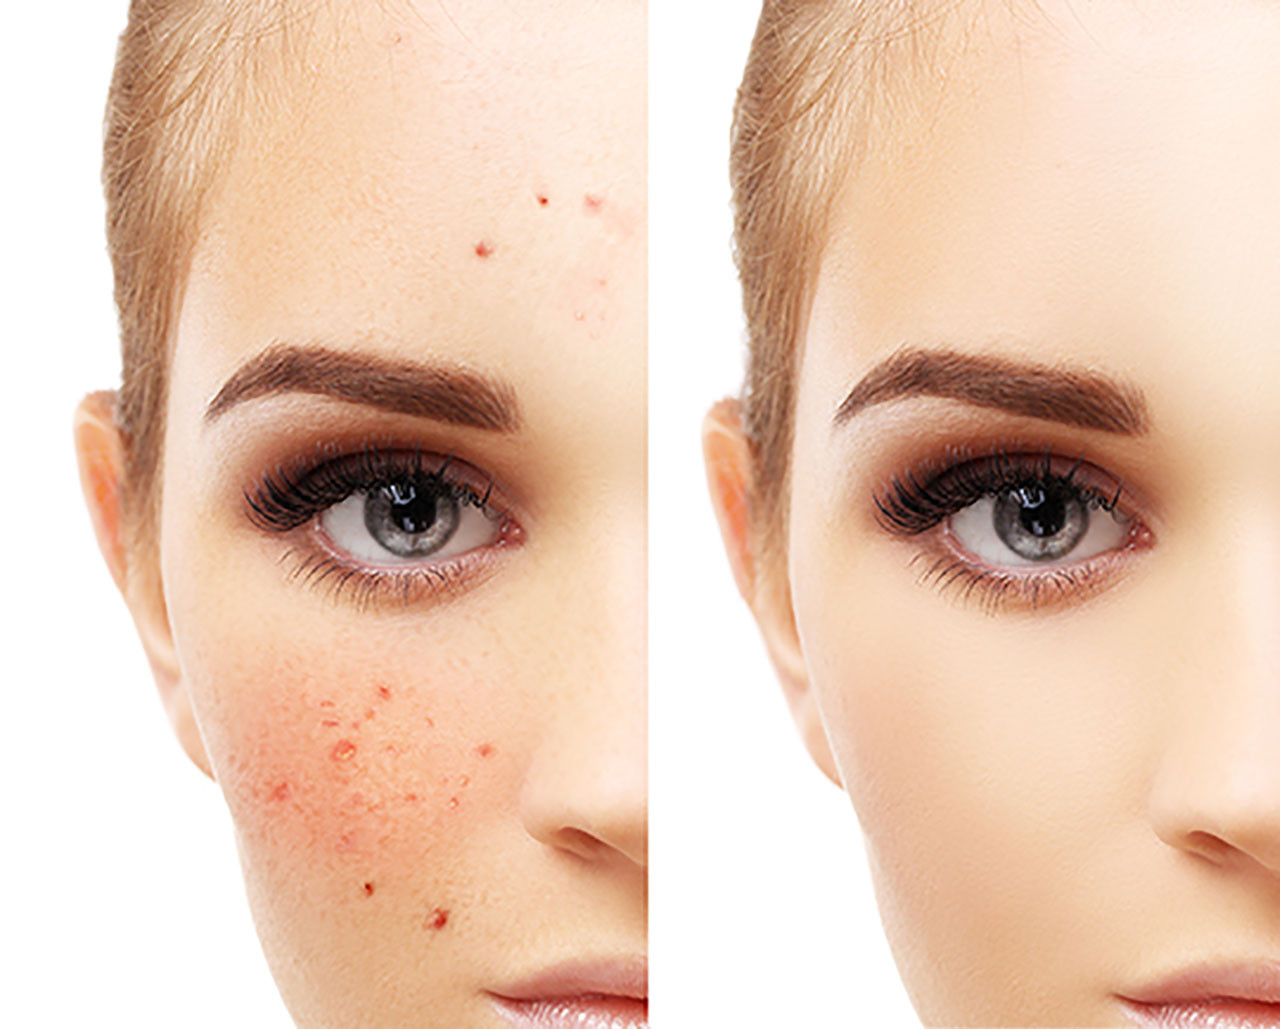 Why Focusing on Wound Healing is Key to Treating Acne